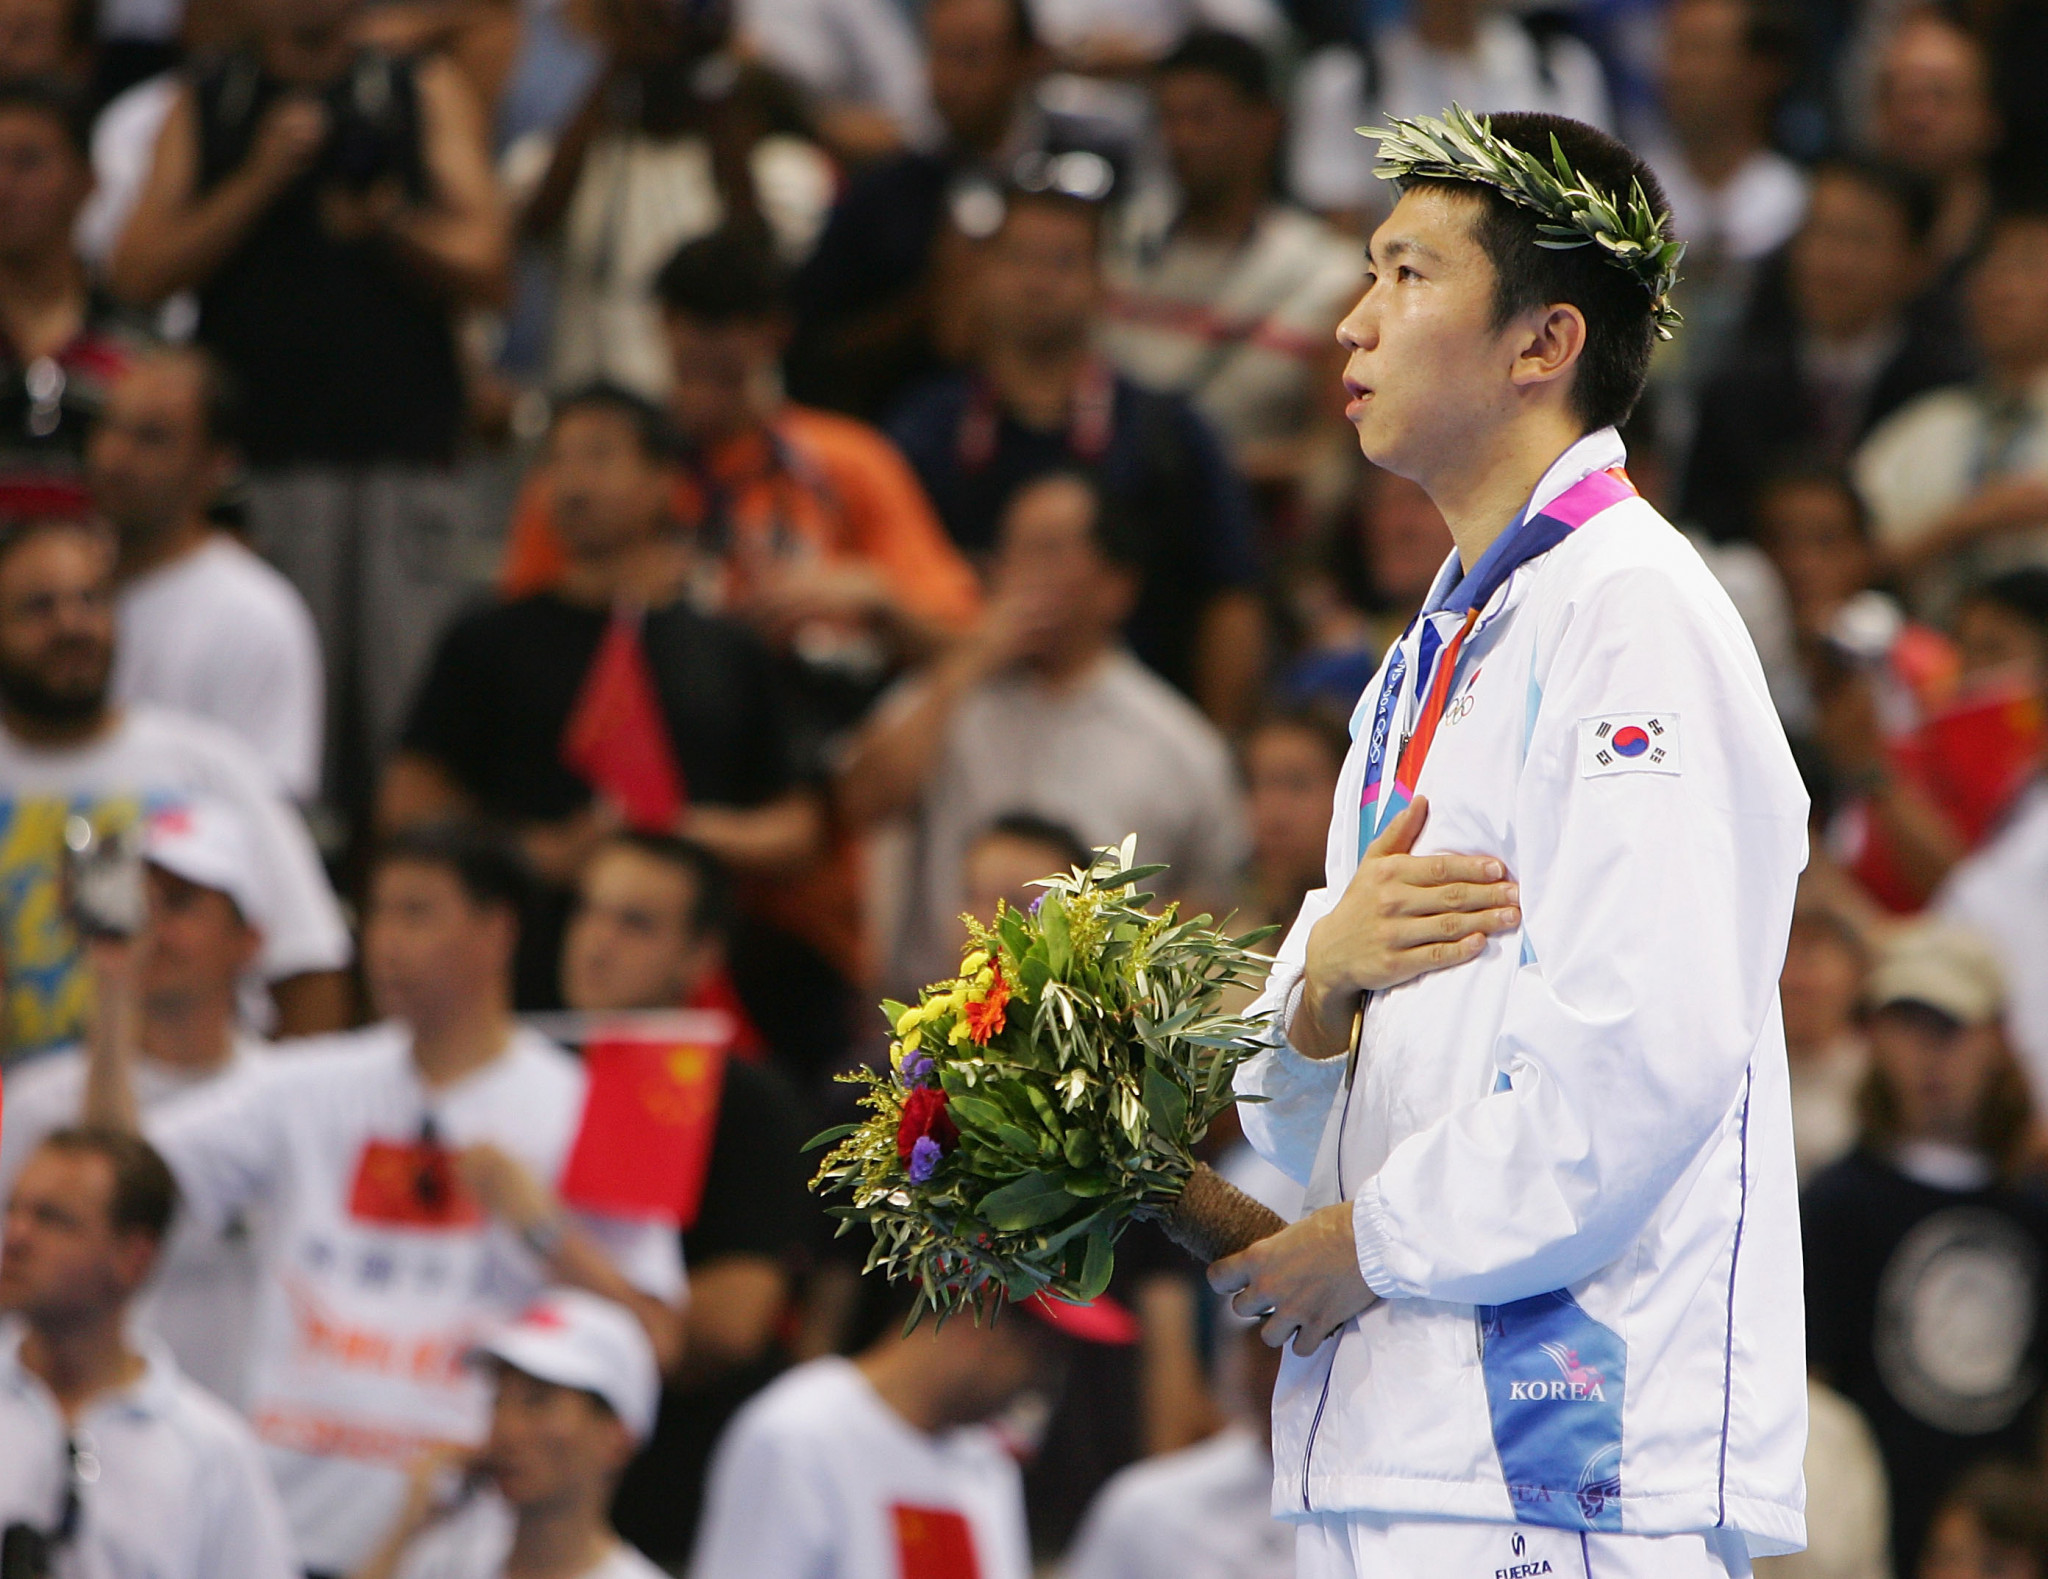 Ryu Seung-min won the men's singles competition at Athens 2004 ©Getty Images